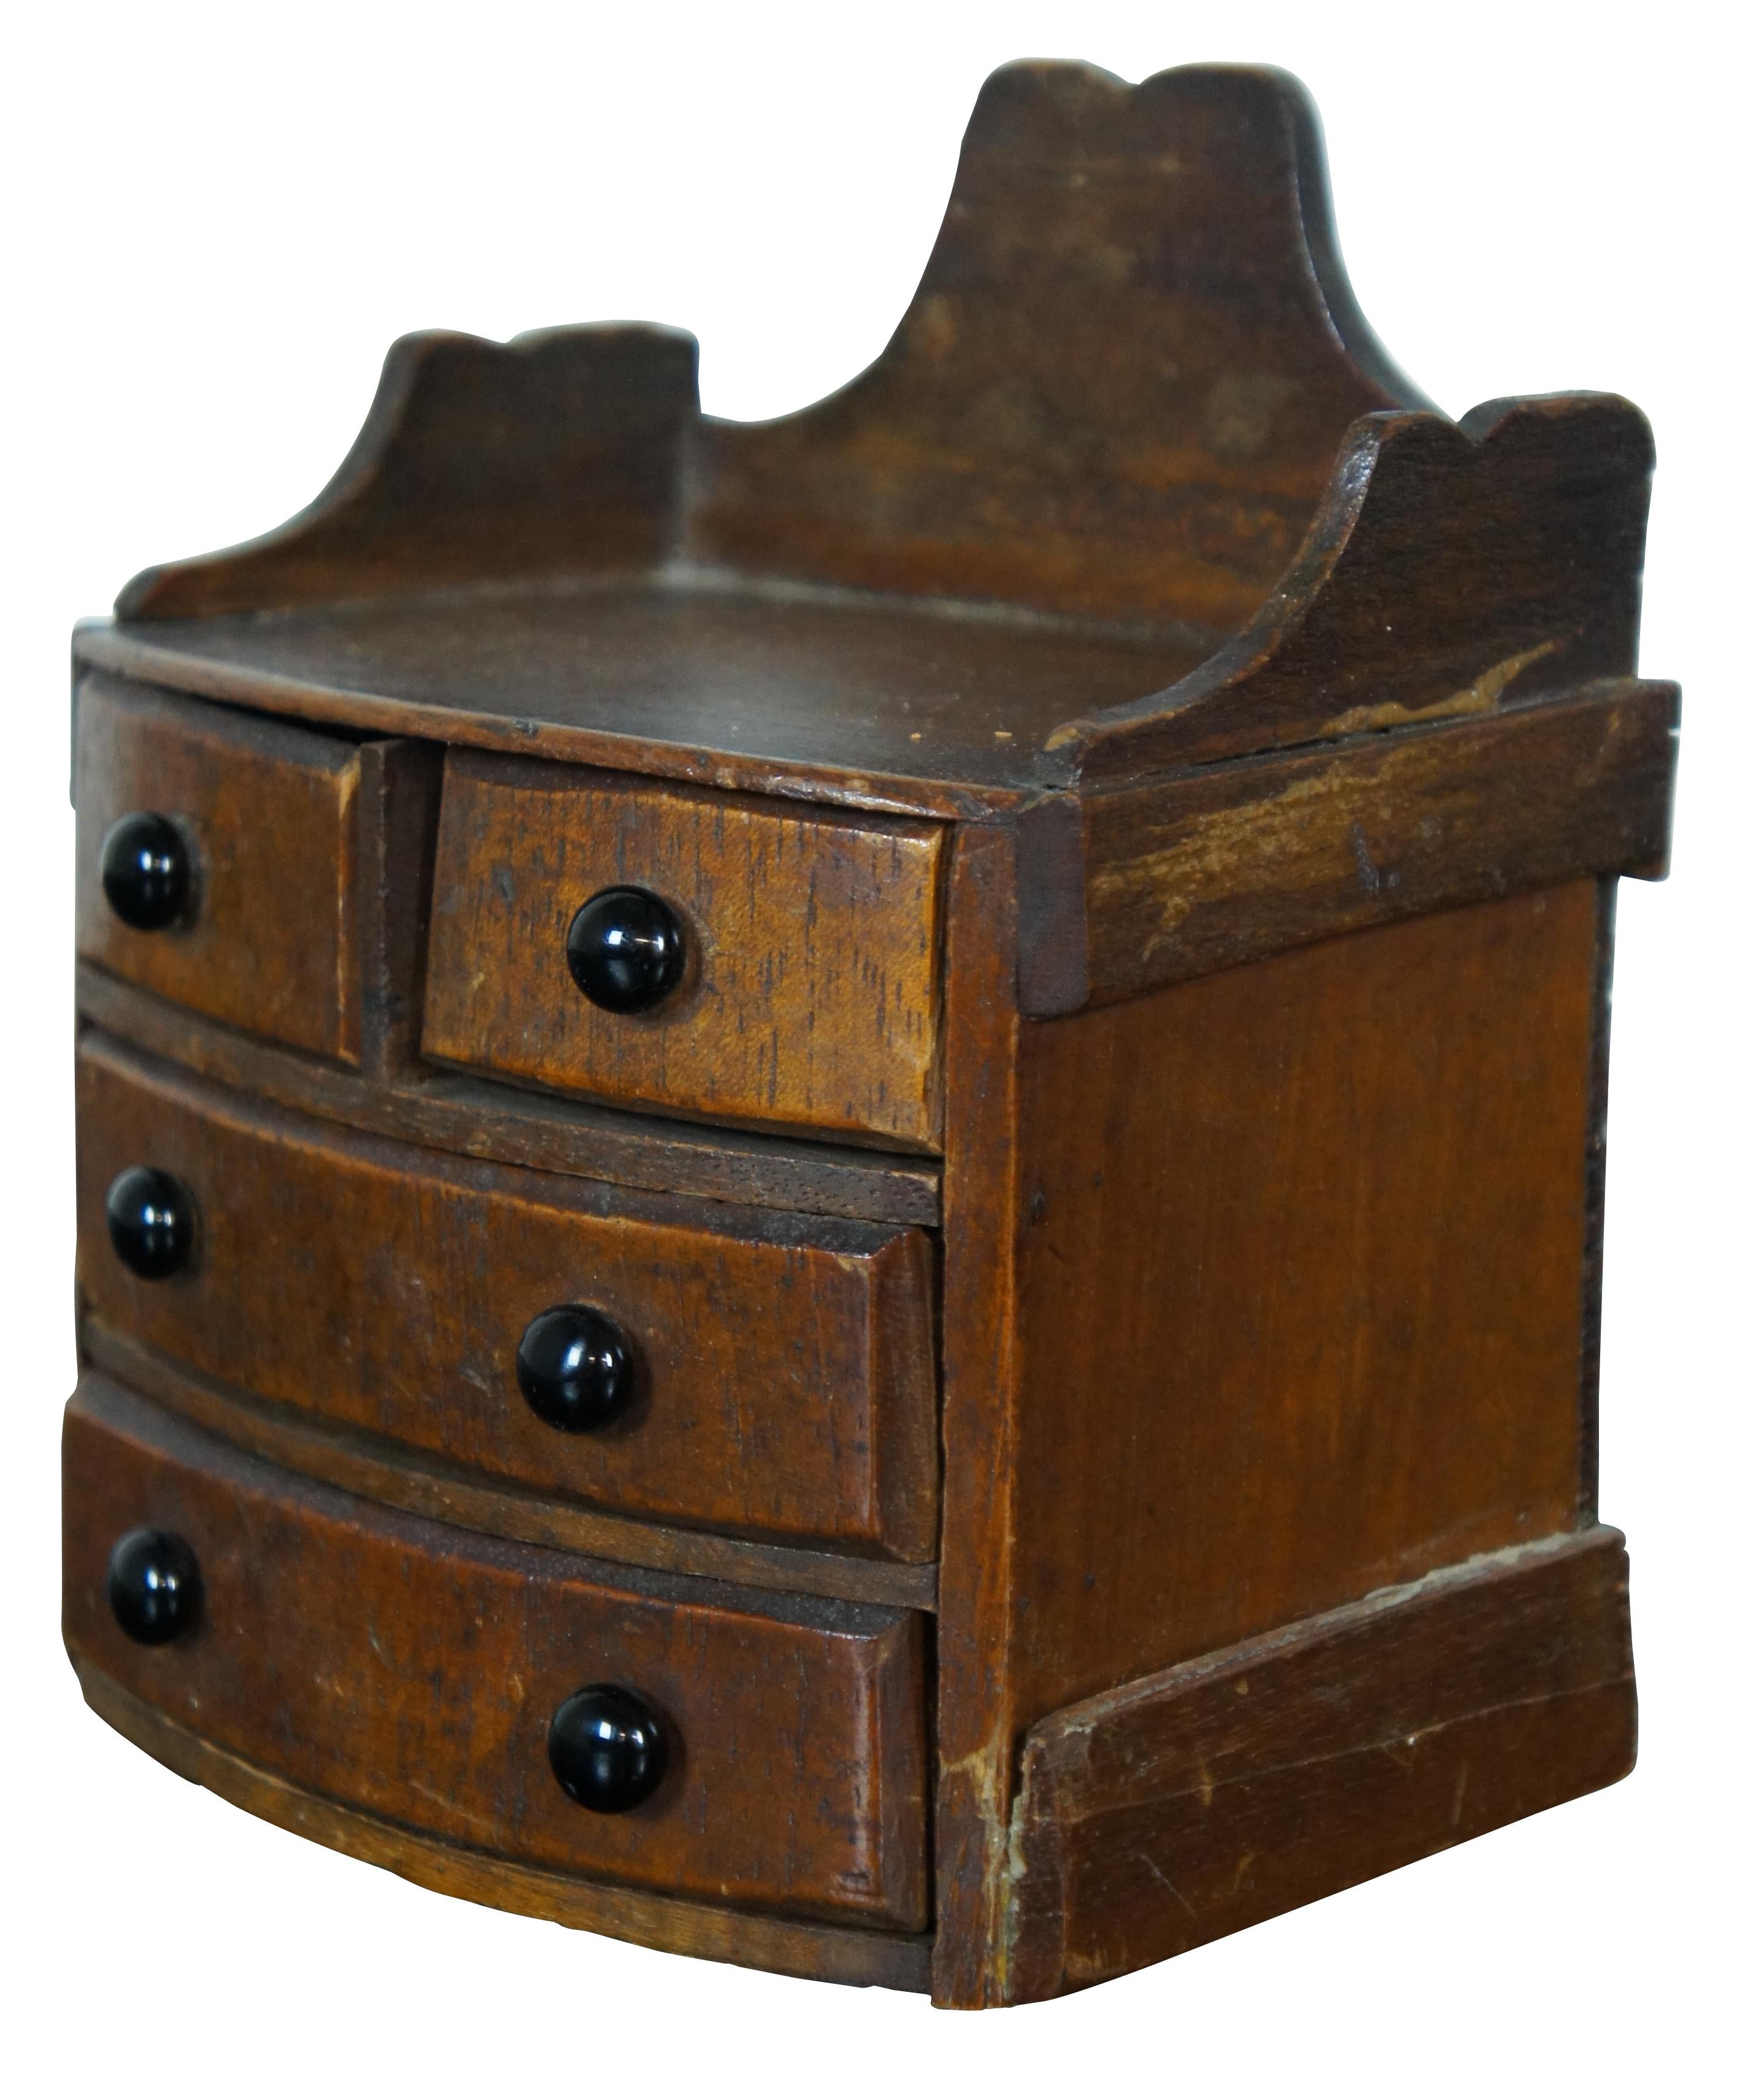 Antique miniature quartersawn oak salesman sample or doll furniture bowfront chest of four drawers with gallery edge or back splash and black drawer pulls. Measure:6”.
 